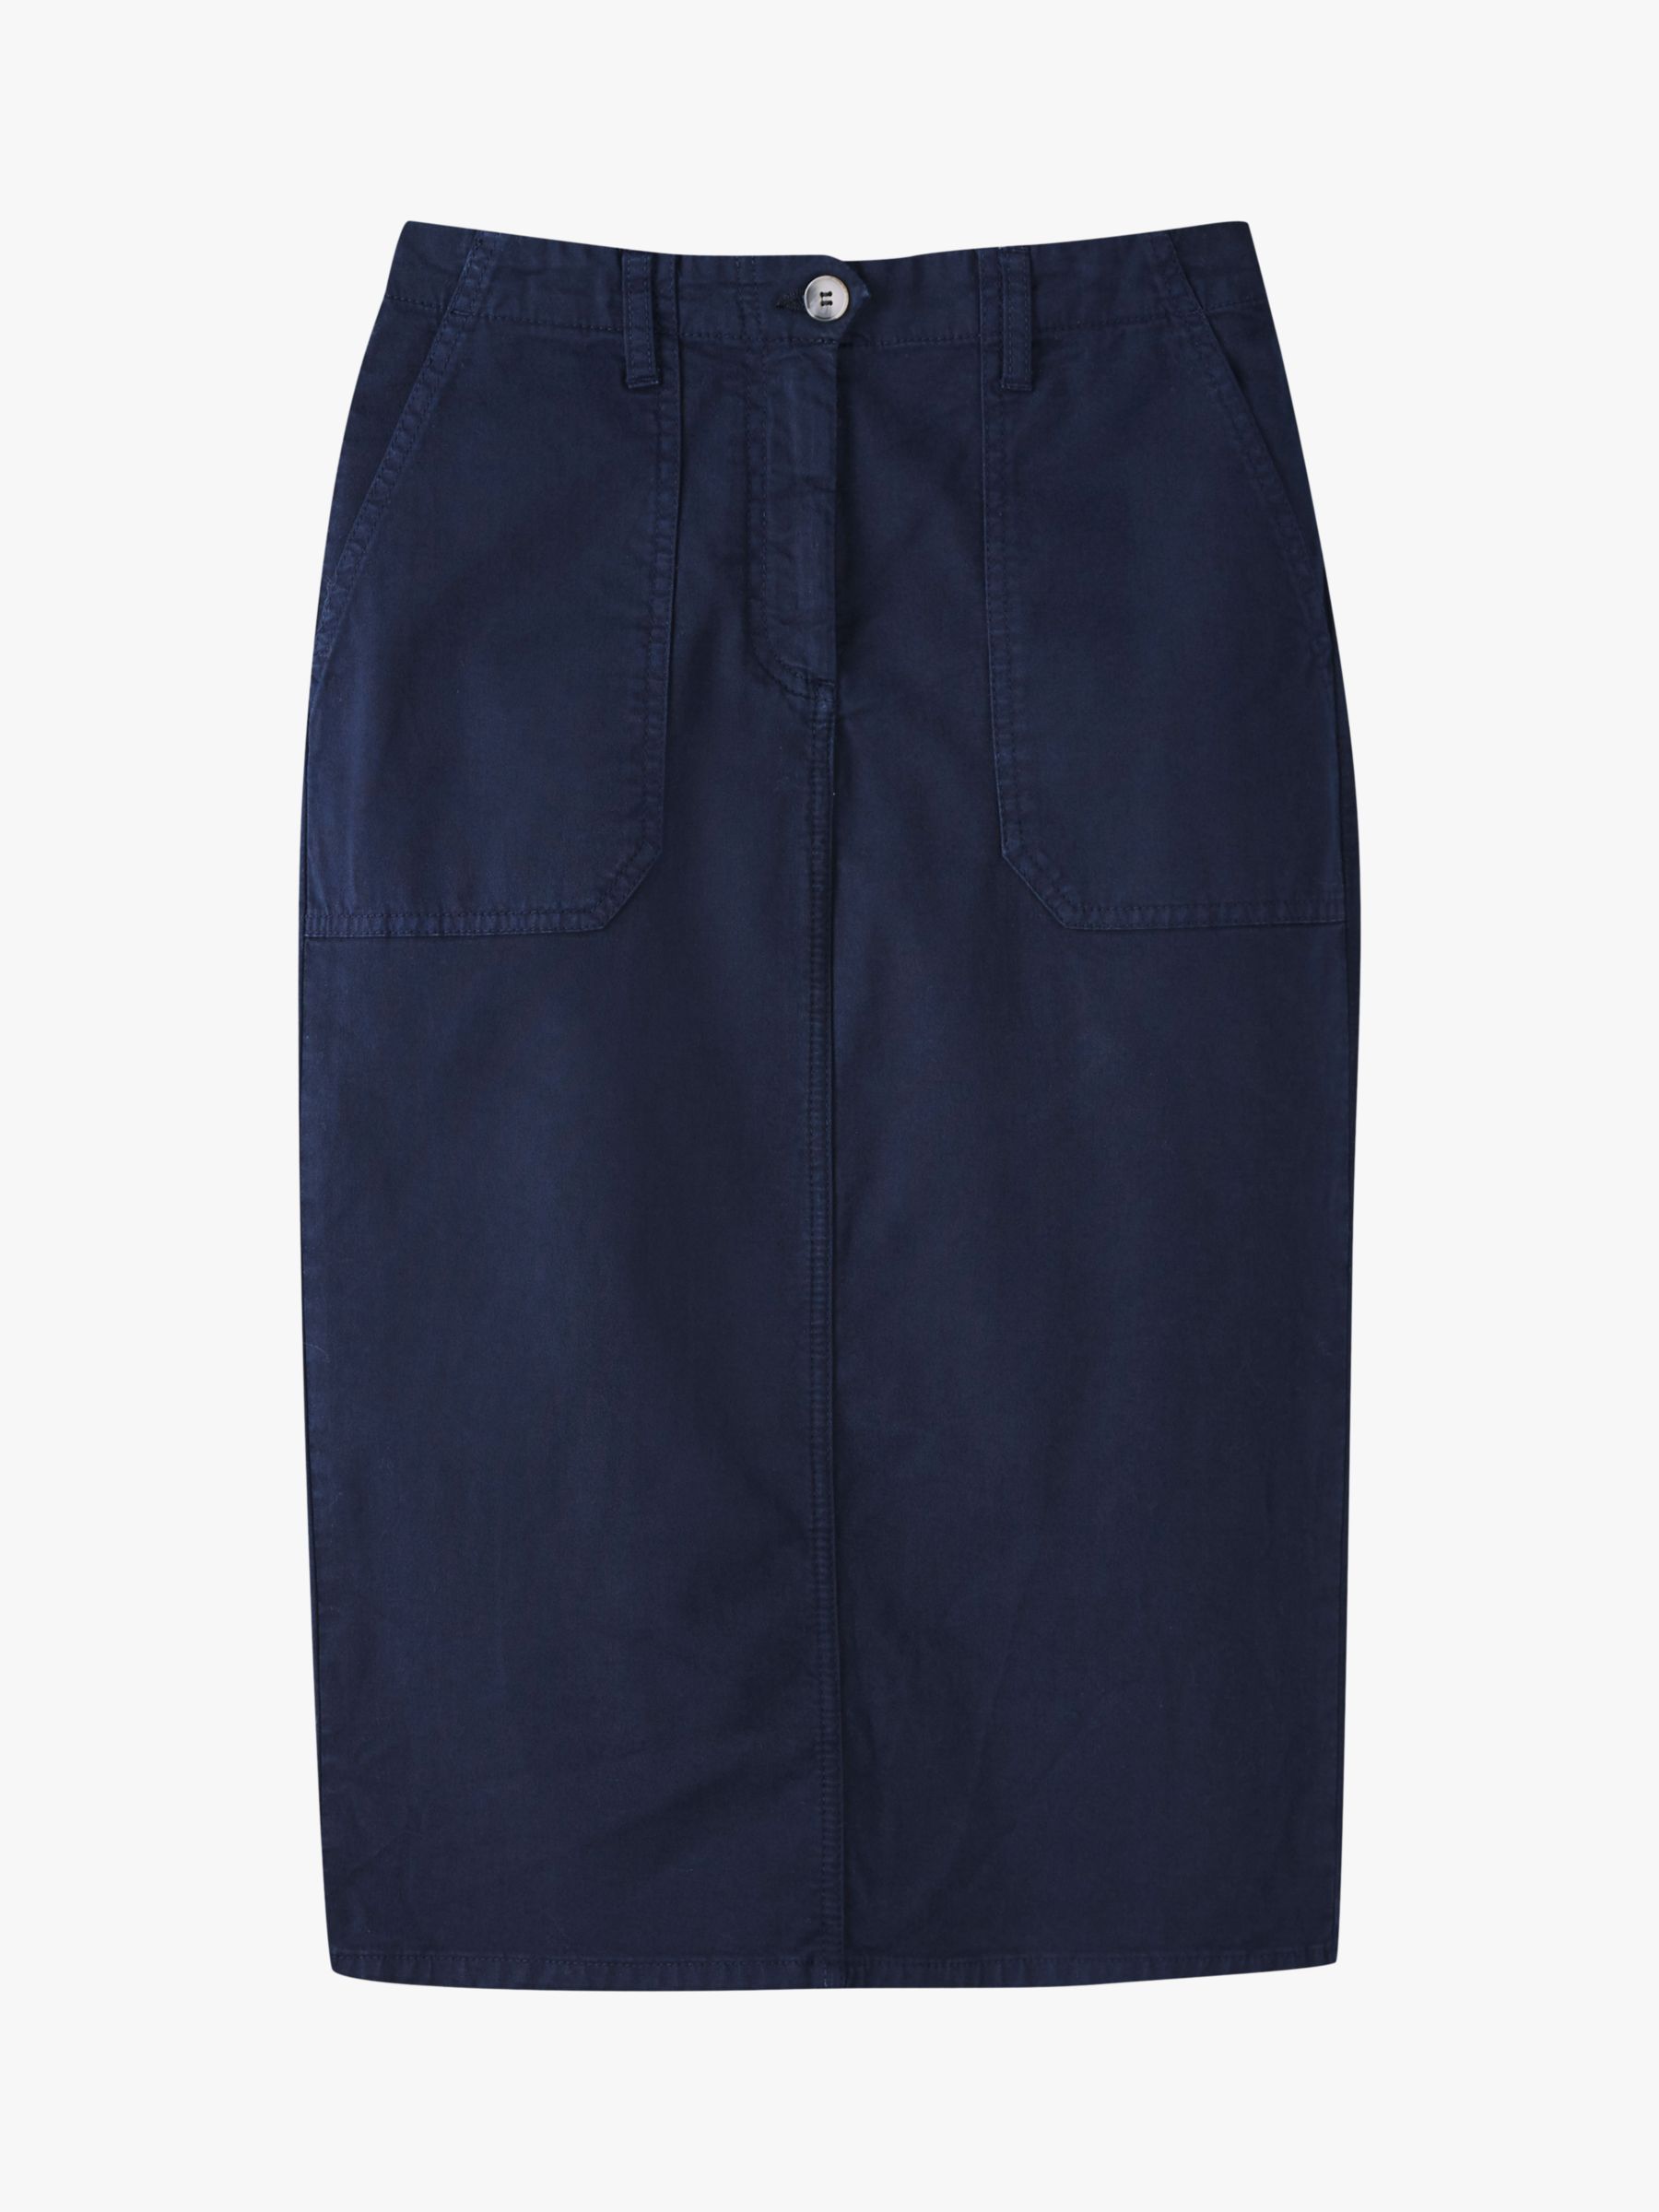 Pure Collection Chino Pencil Skirts, Navy at John Lewis & Partners